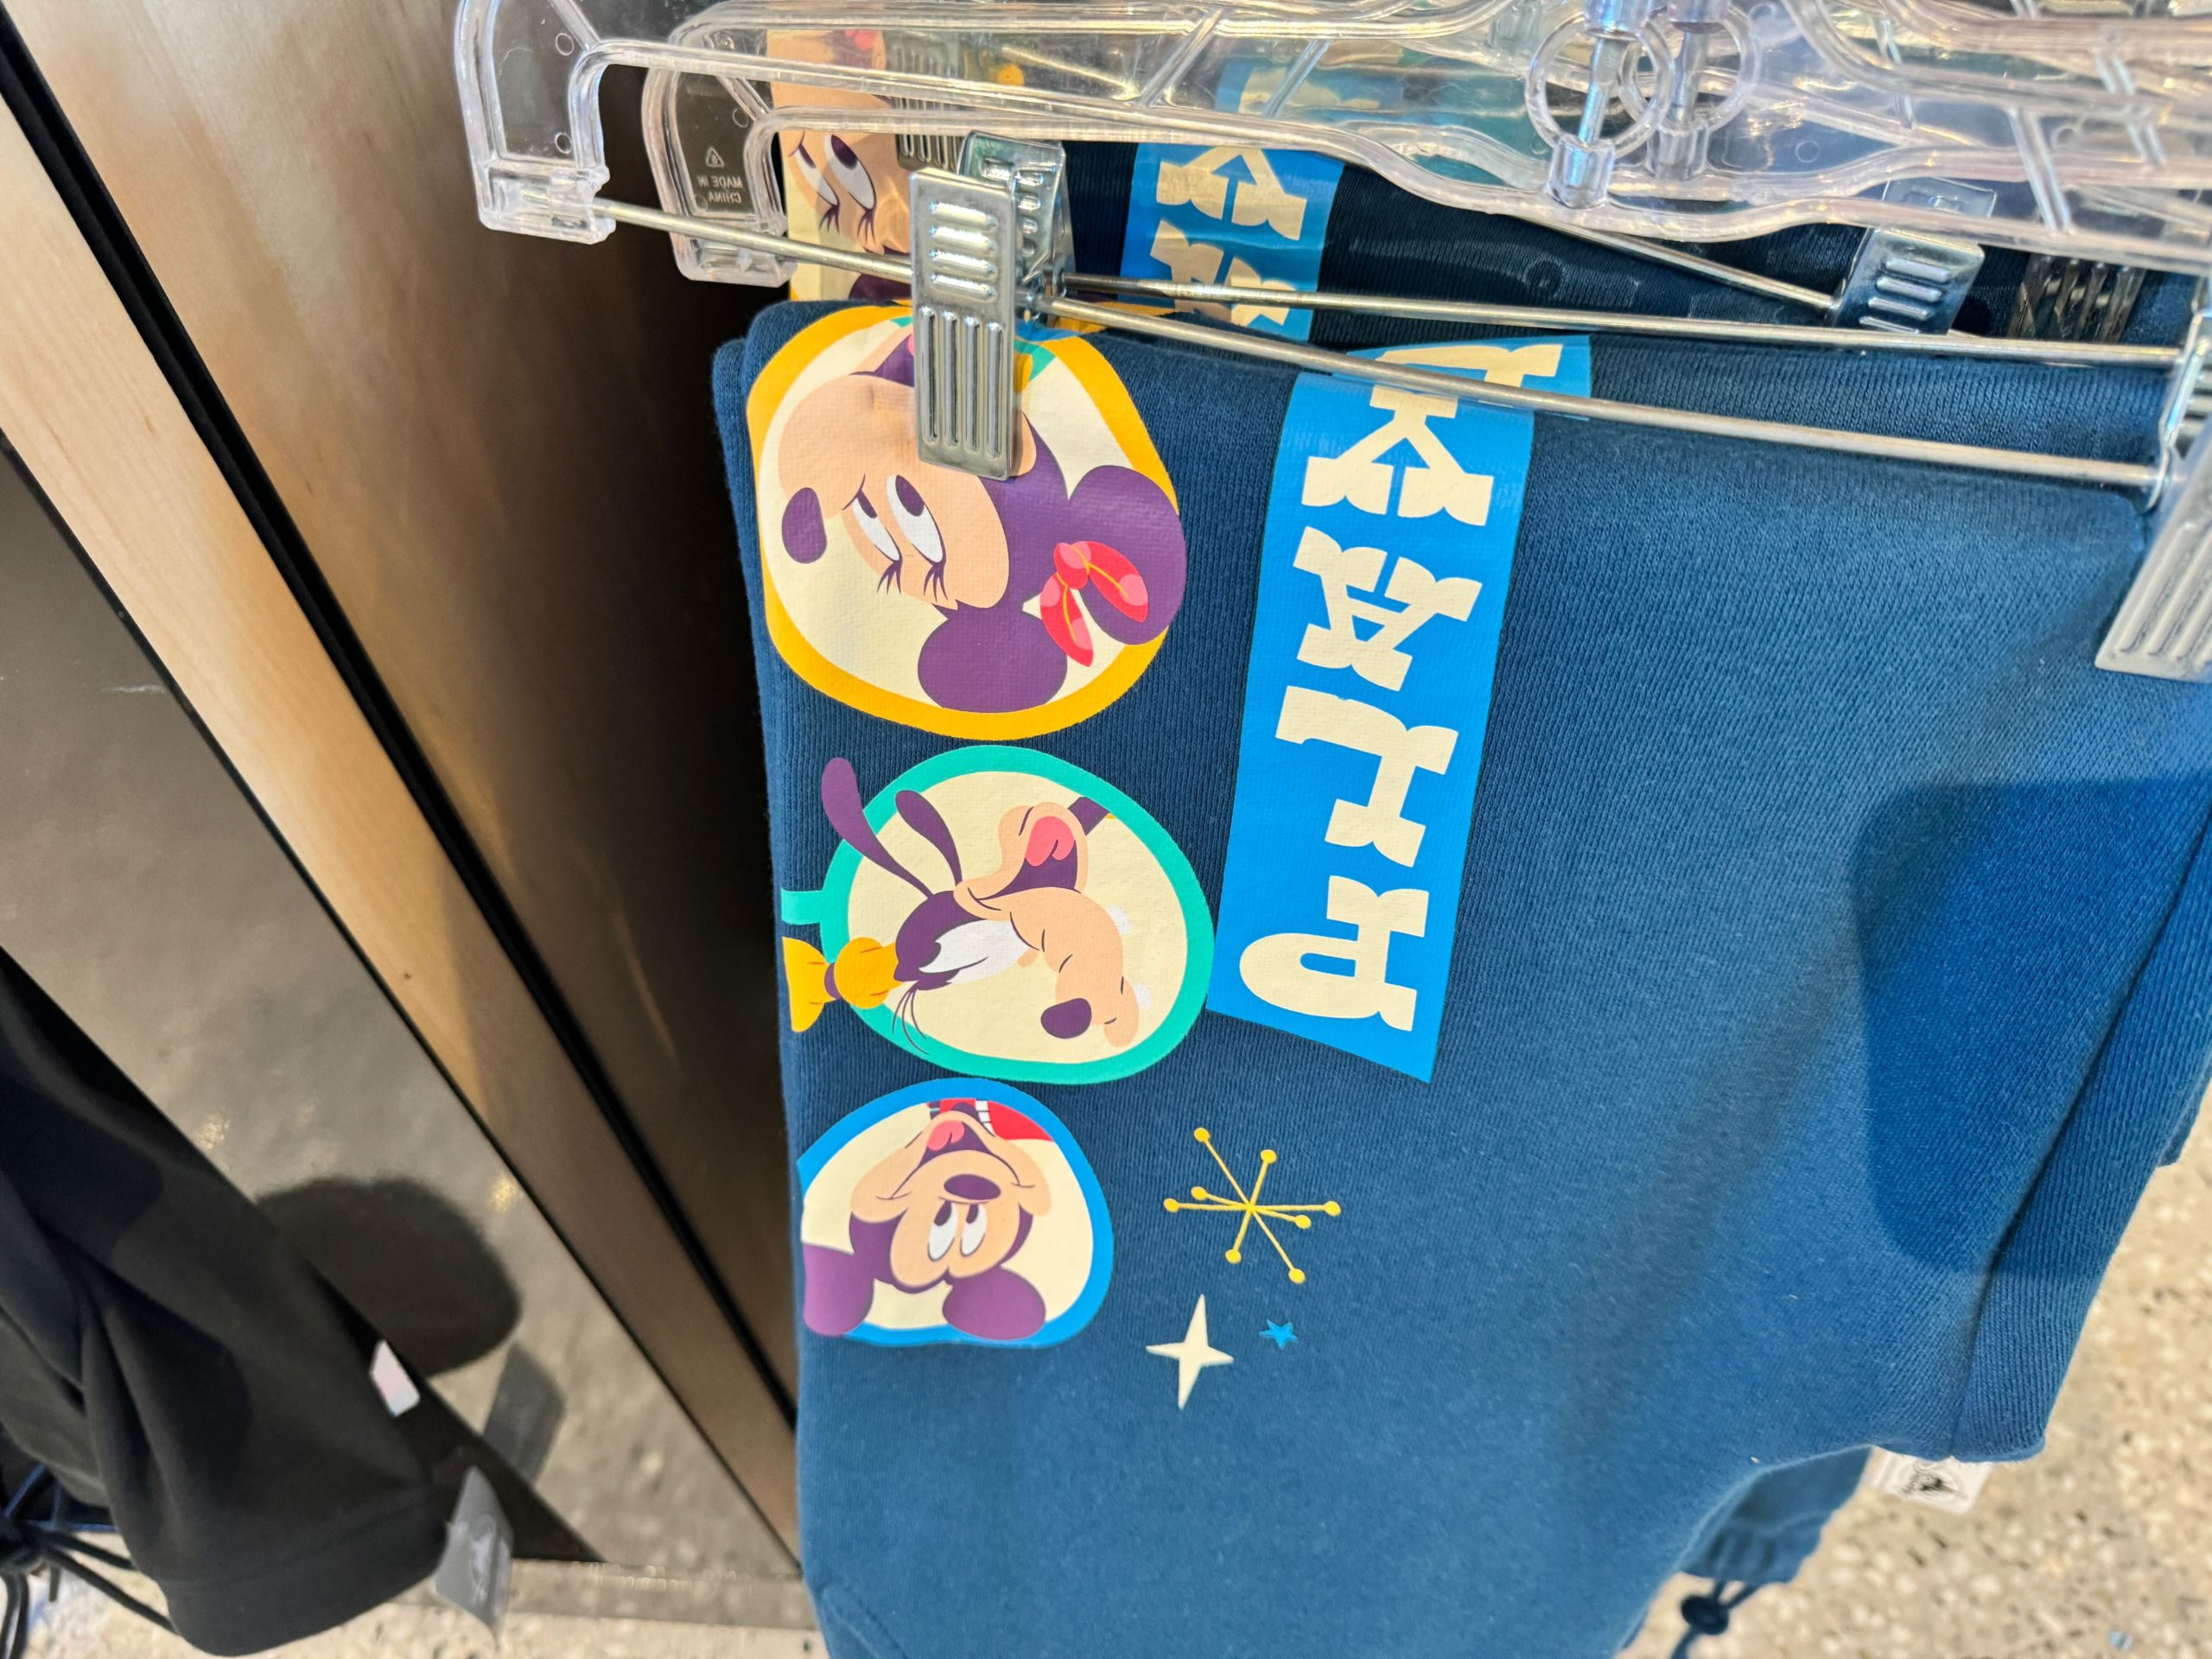 Play in the Parks merchandise